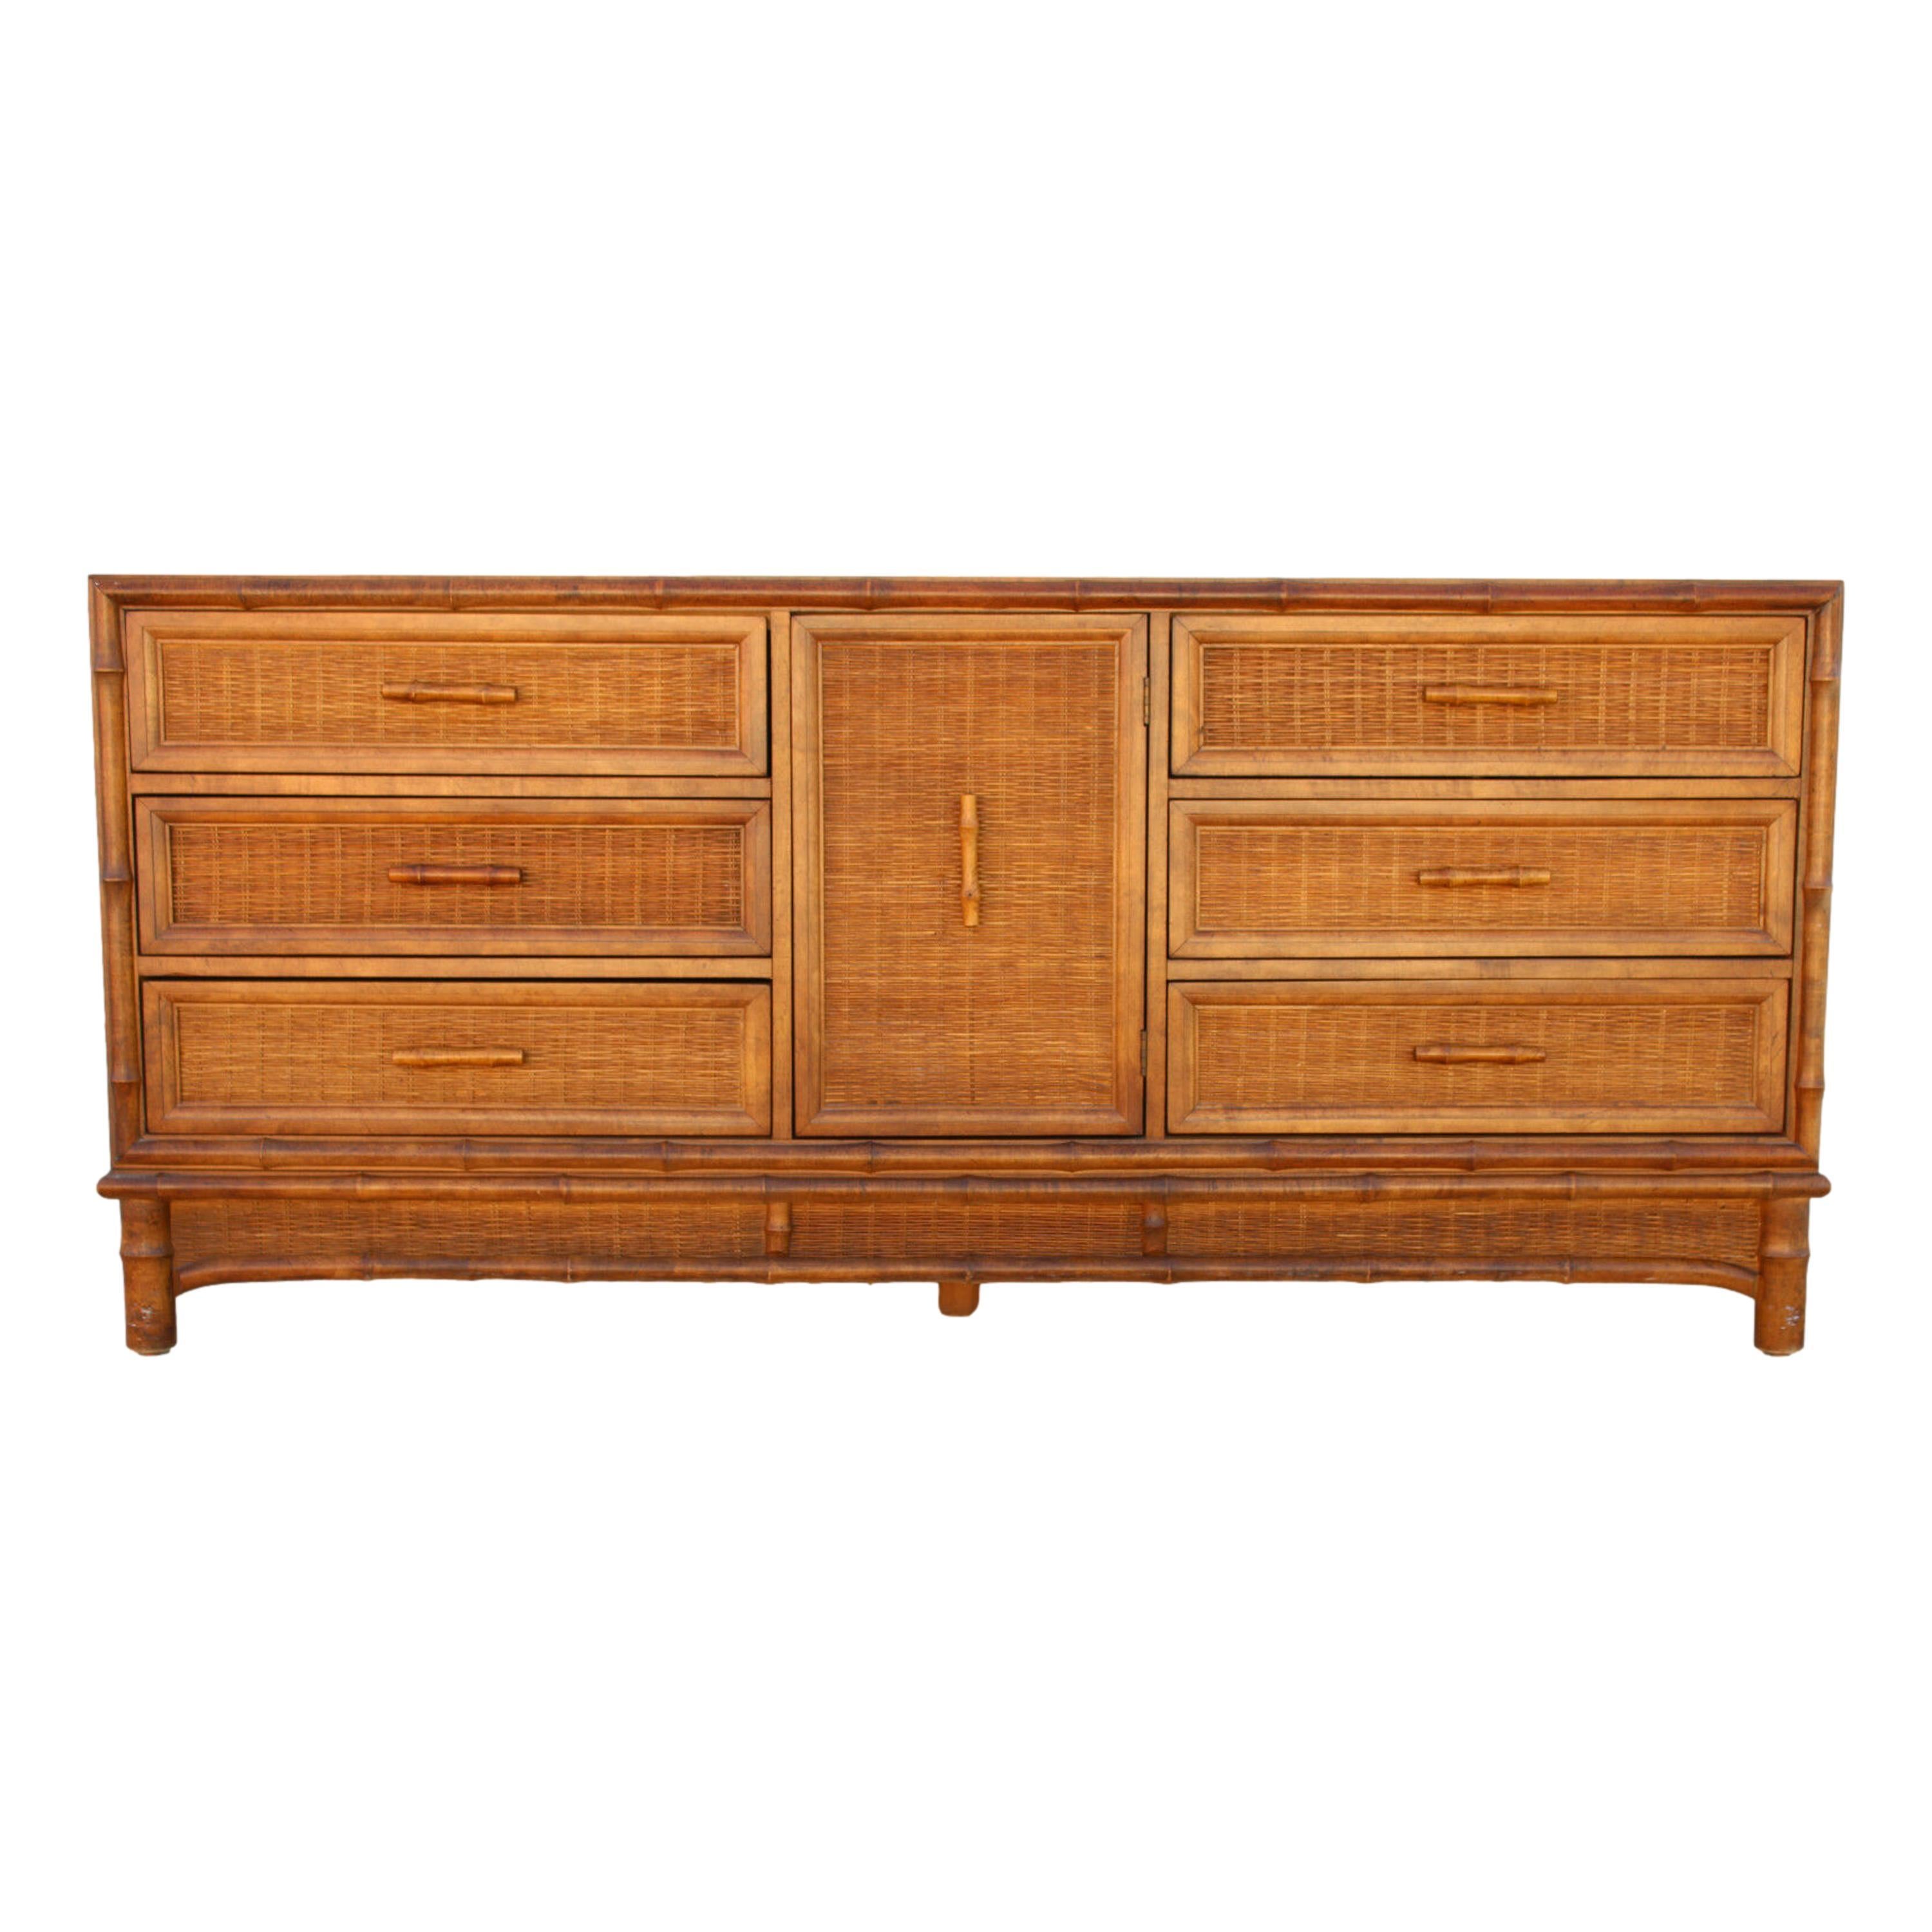 A timeless beauty from American of Martinsville with handsome faux bamboo styling, woven drawer fronts, and faux bamboo pulls in the same color for understated appeal. A center door reveals three hidden drawers. Equally at home in the bedroom, the